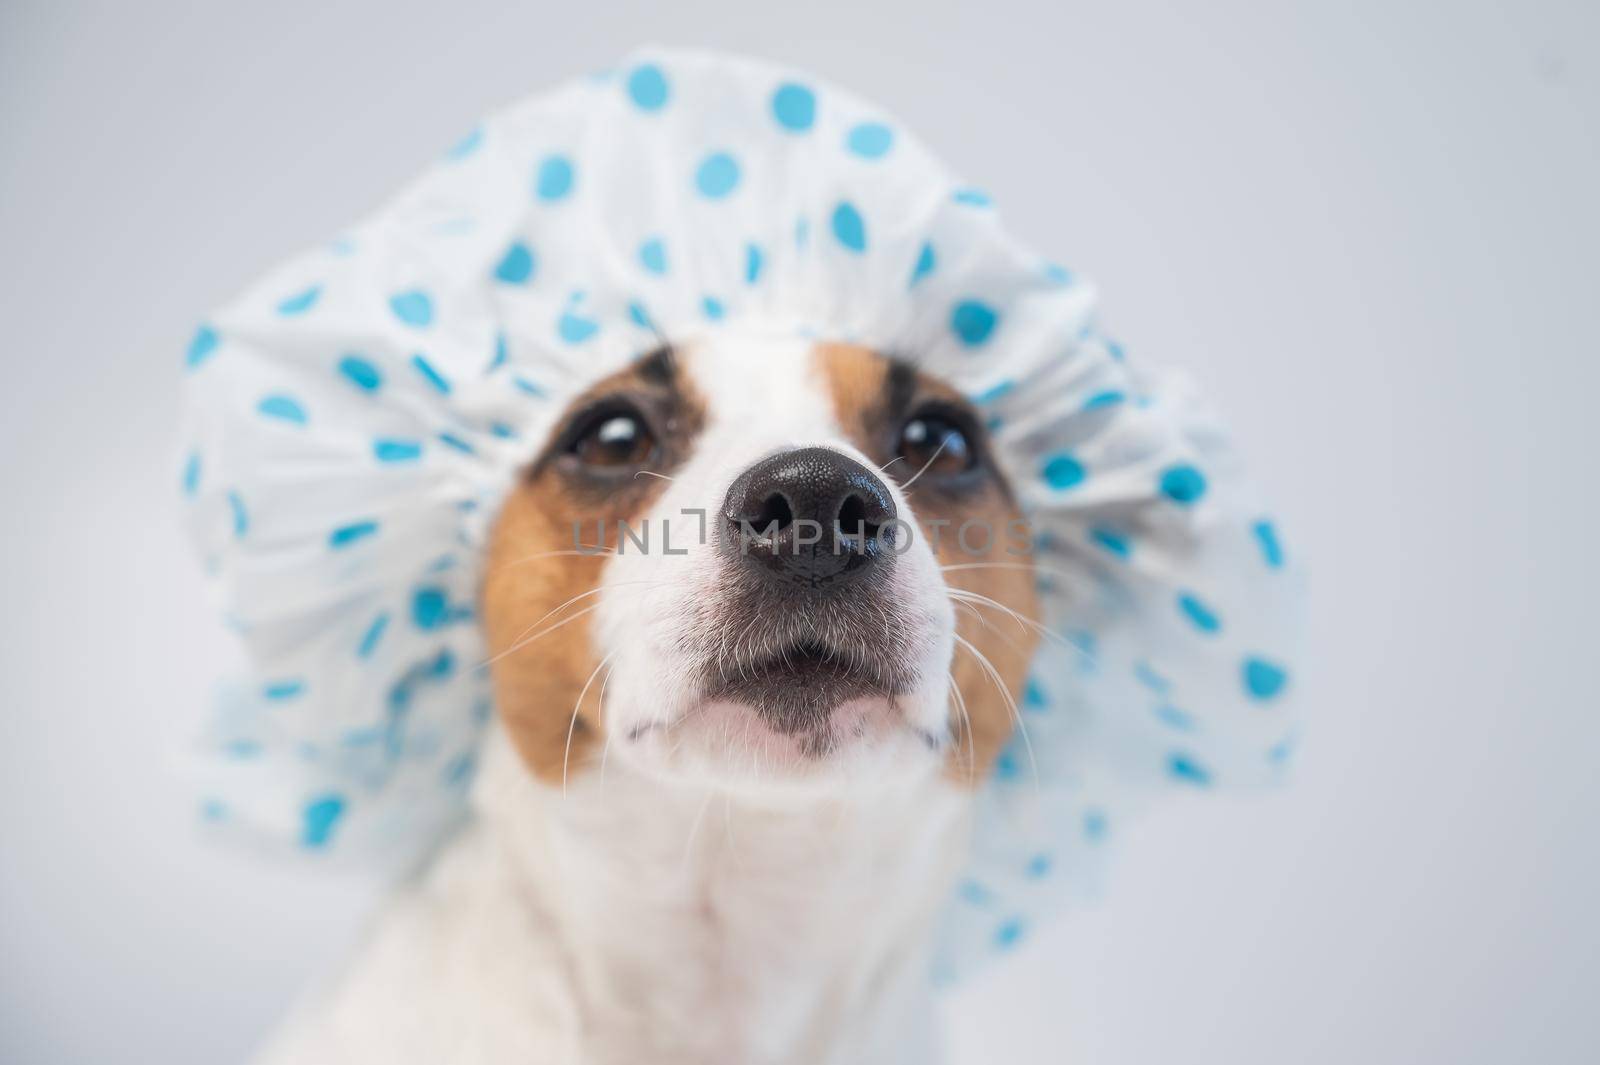 Funny friendly dog jack russell terrier takes a bath with foam in a shower cap on a white background. Copy space by mrwed54